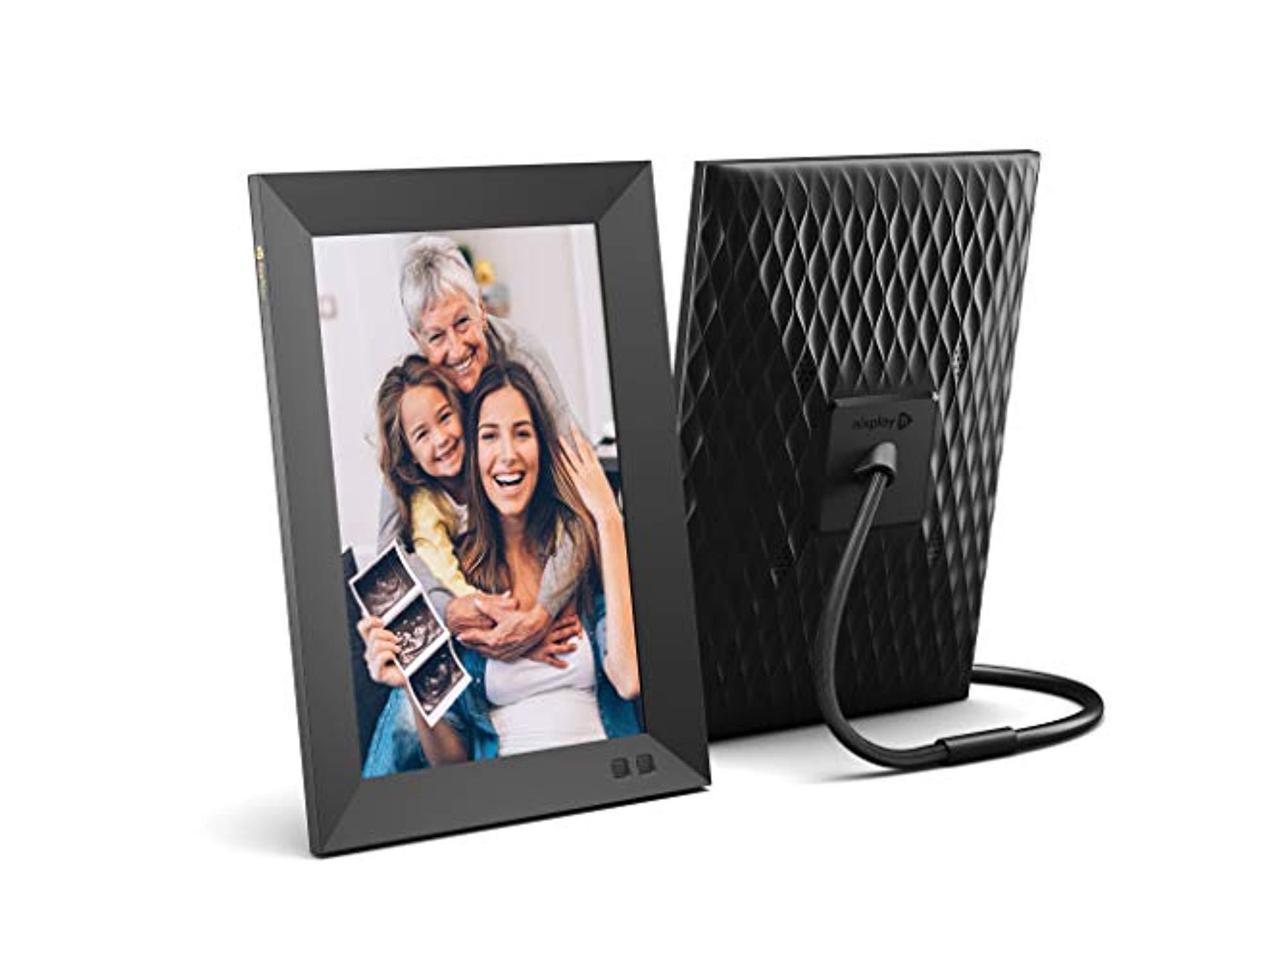 nixplay 10.1 inch smart photo frame w10f black - digital wifi picture frame with 1280x800 hd display, motion sensor and 10gb on